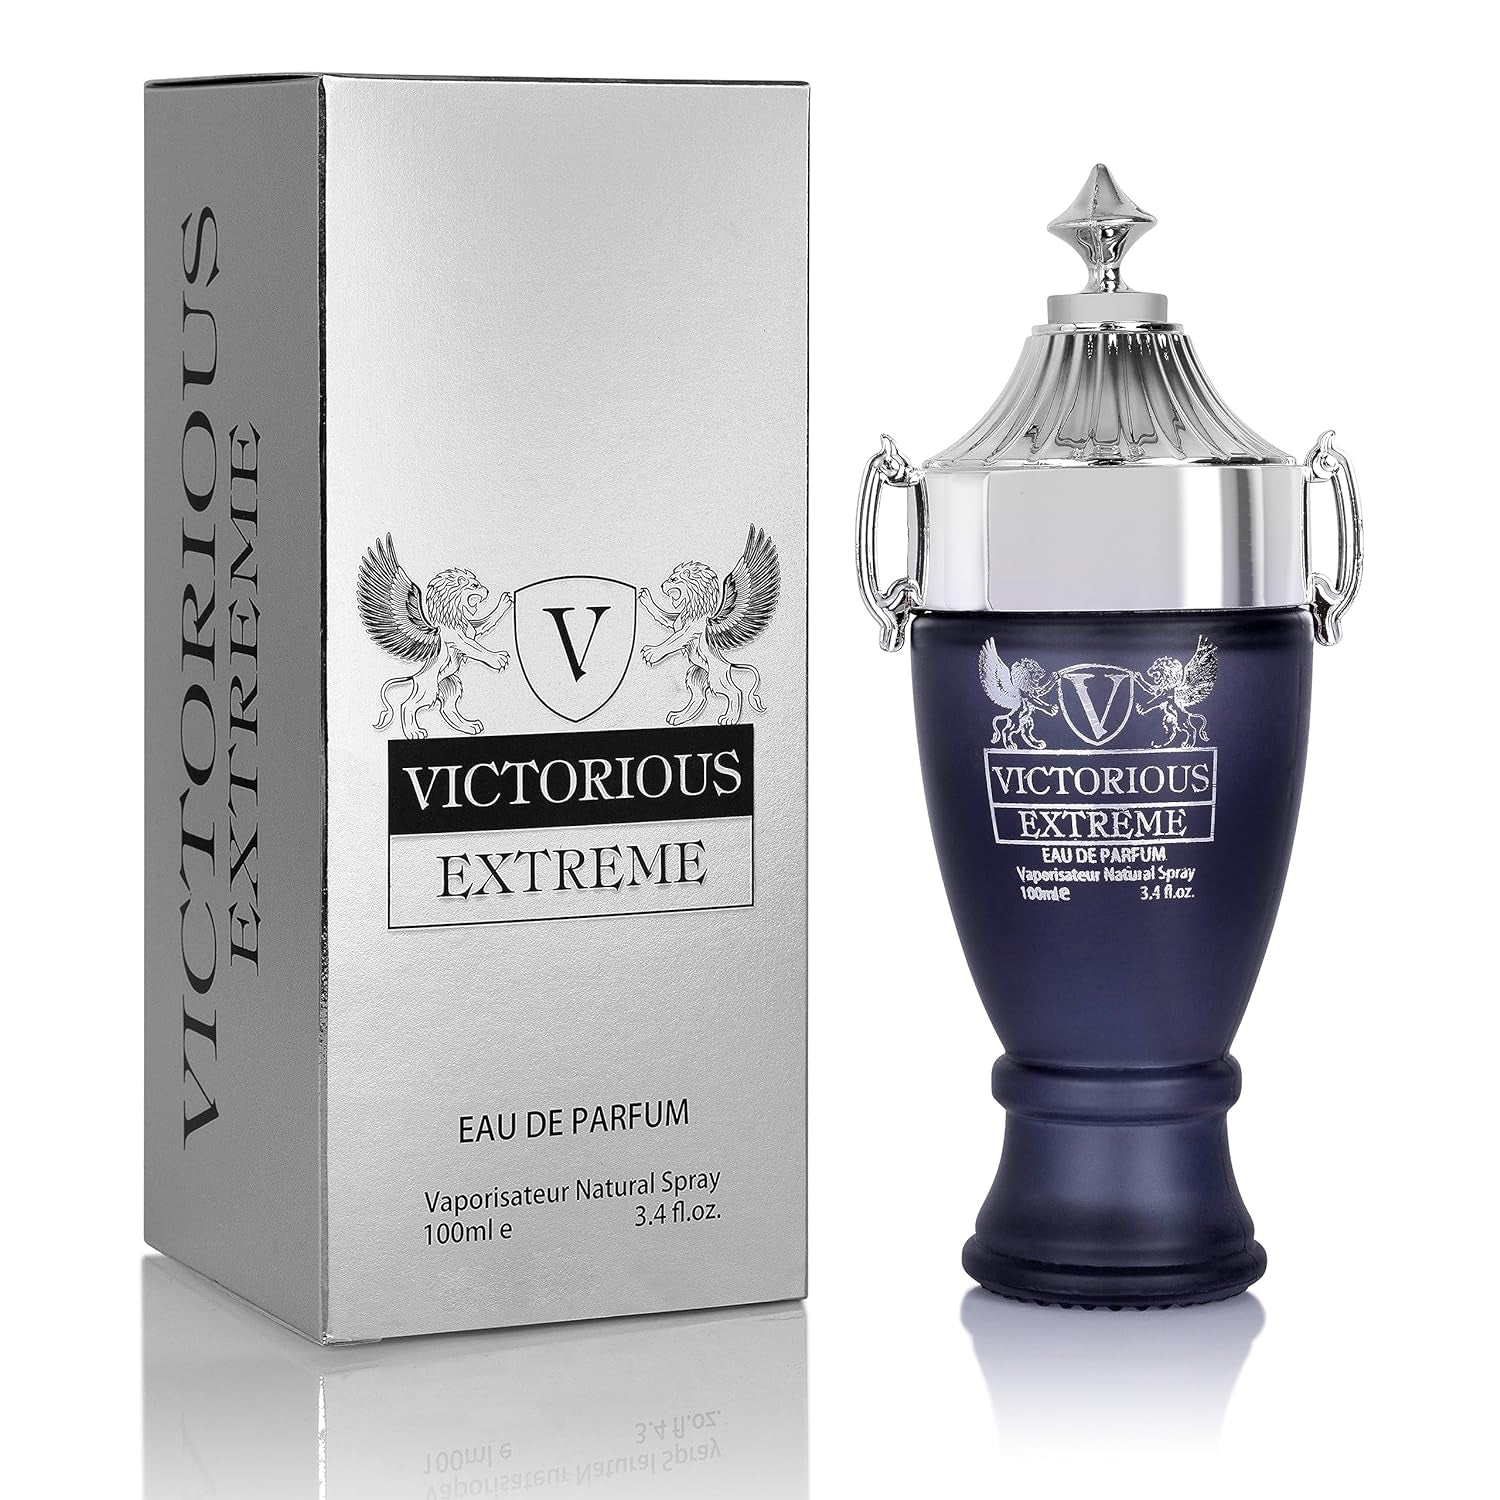 Urban Collection Victorious Extreme for Men - Formulated Using the Finest, Prime Ingredients - Fruity, Salty Fragrance - Black pepper & Fresh Orange Blossom - Packaged in a 100% Recycled Paper